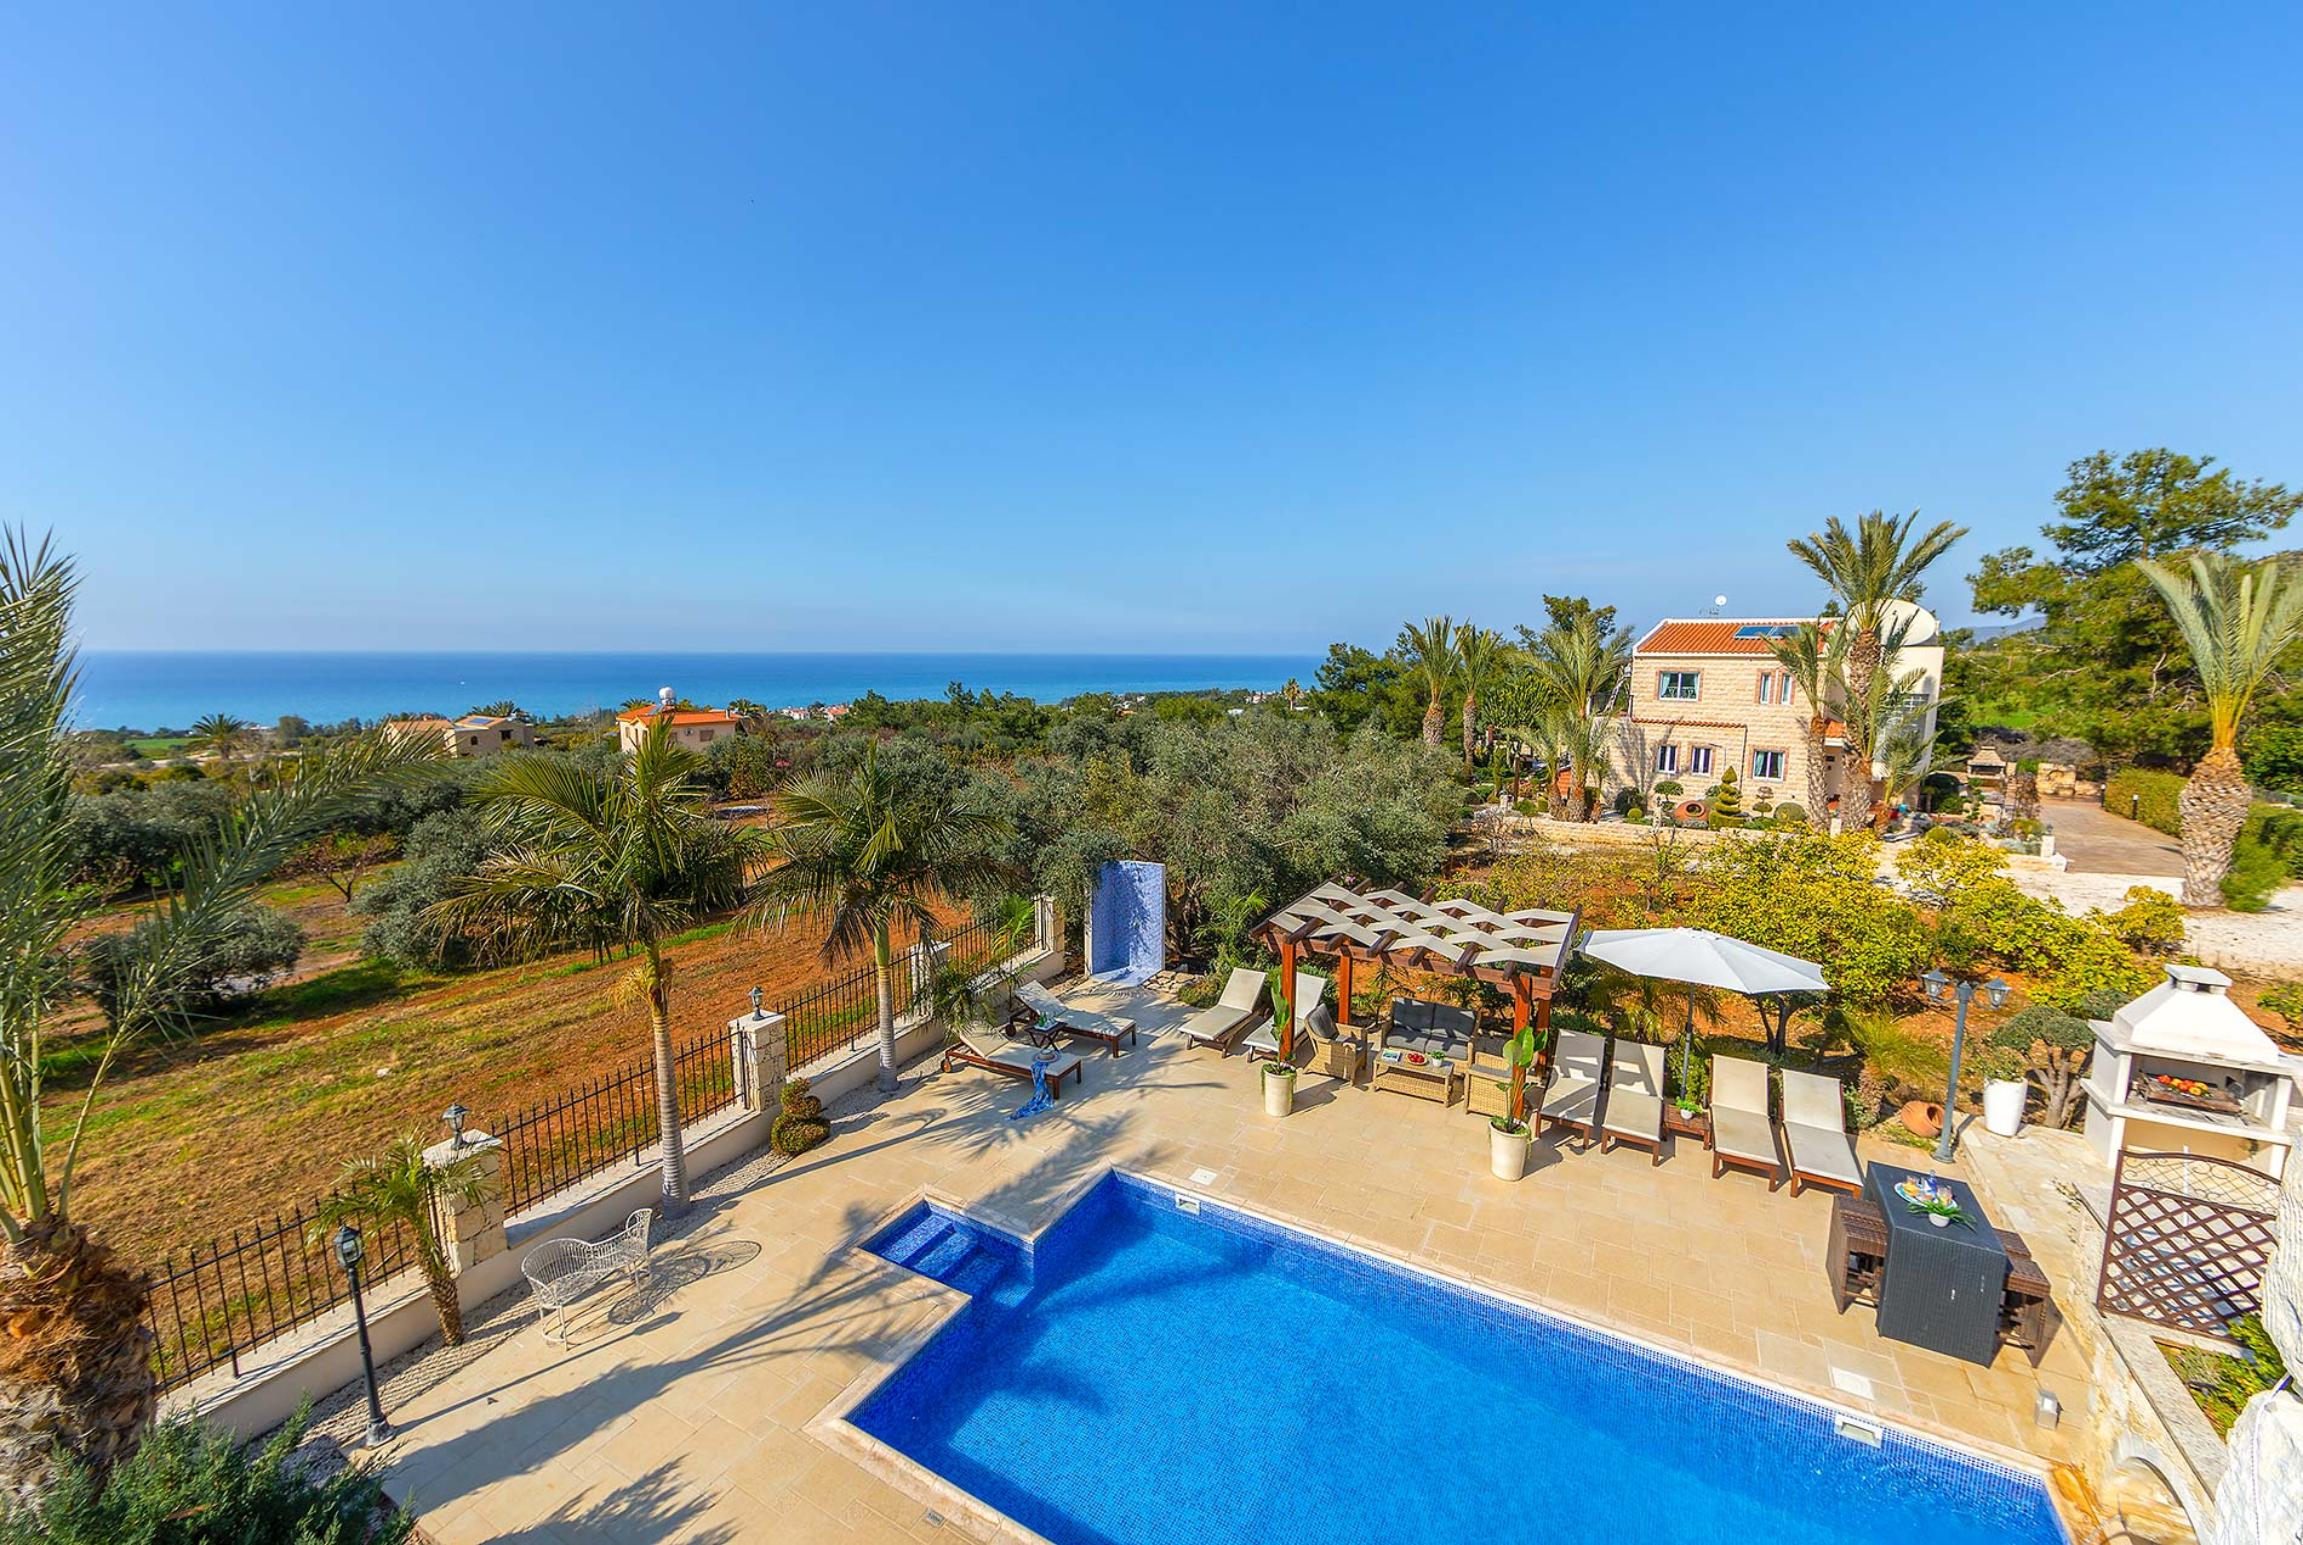 Property Image 2 - Stunning villa with pool overlooking sea views